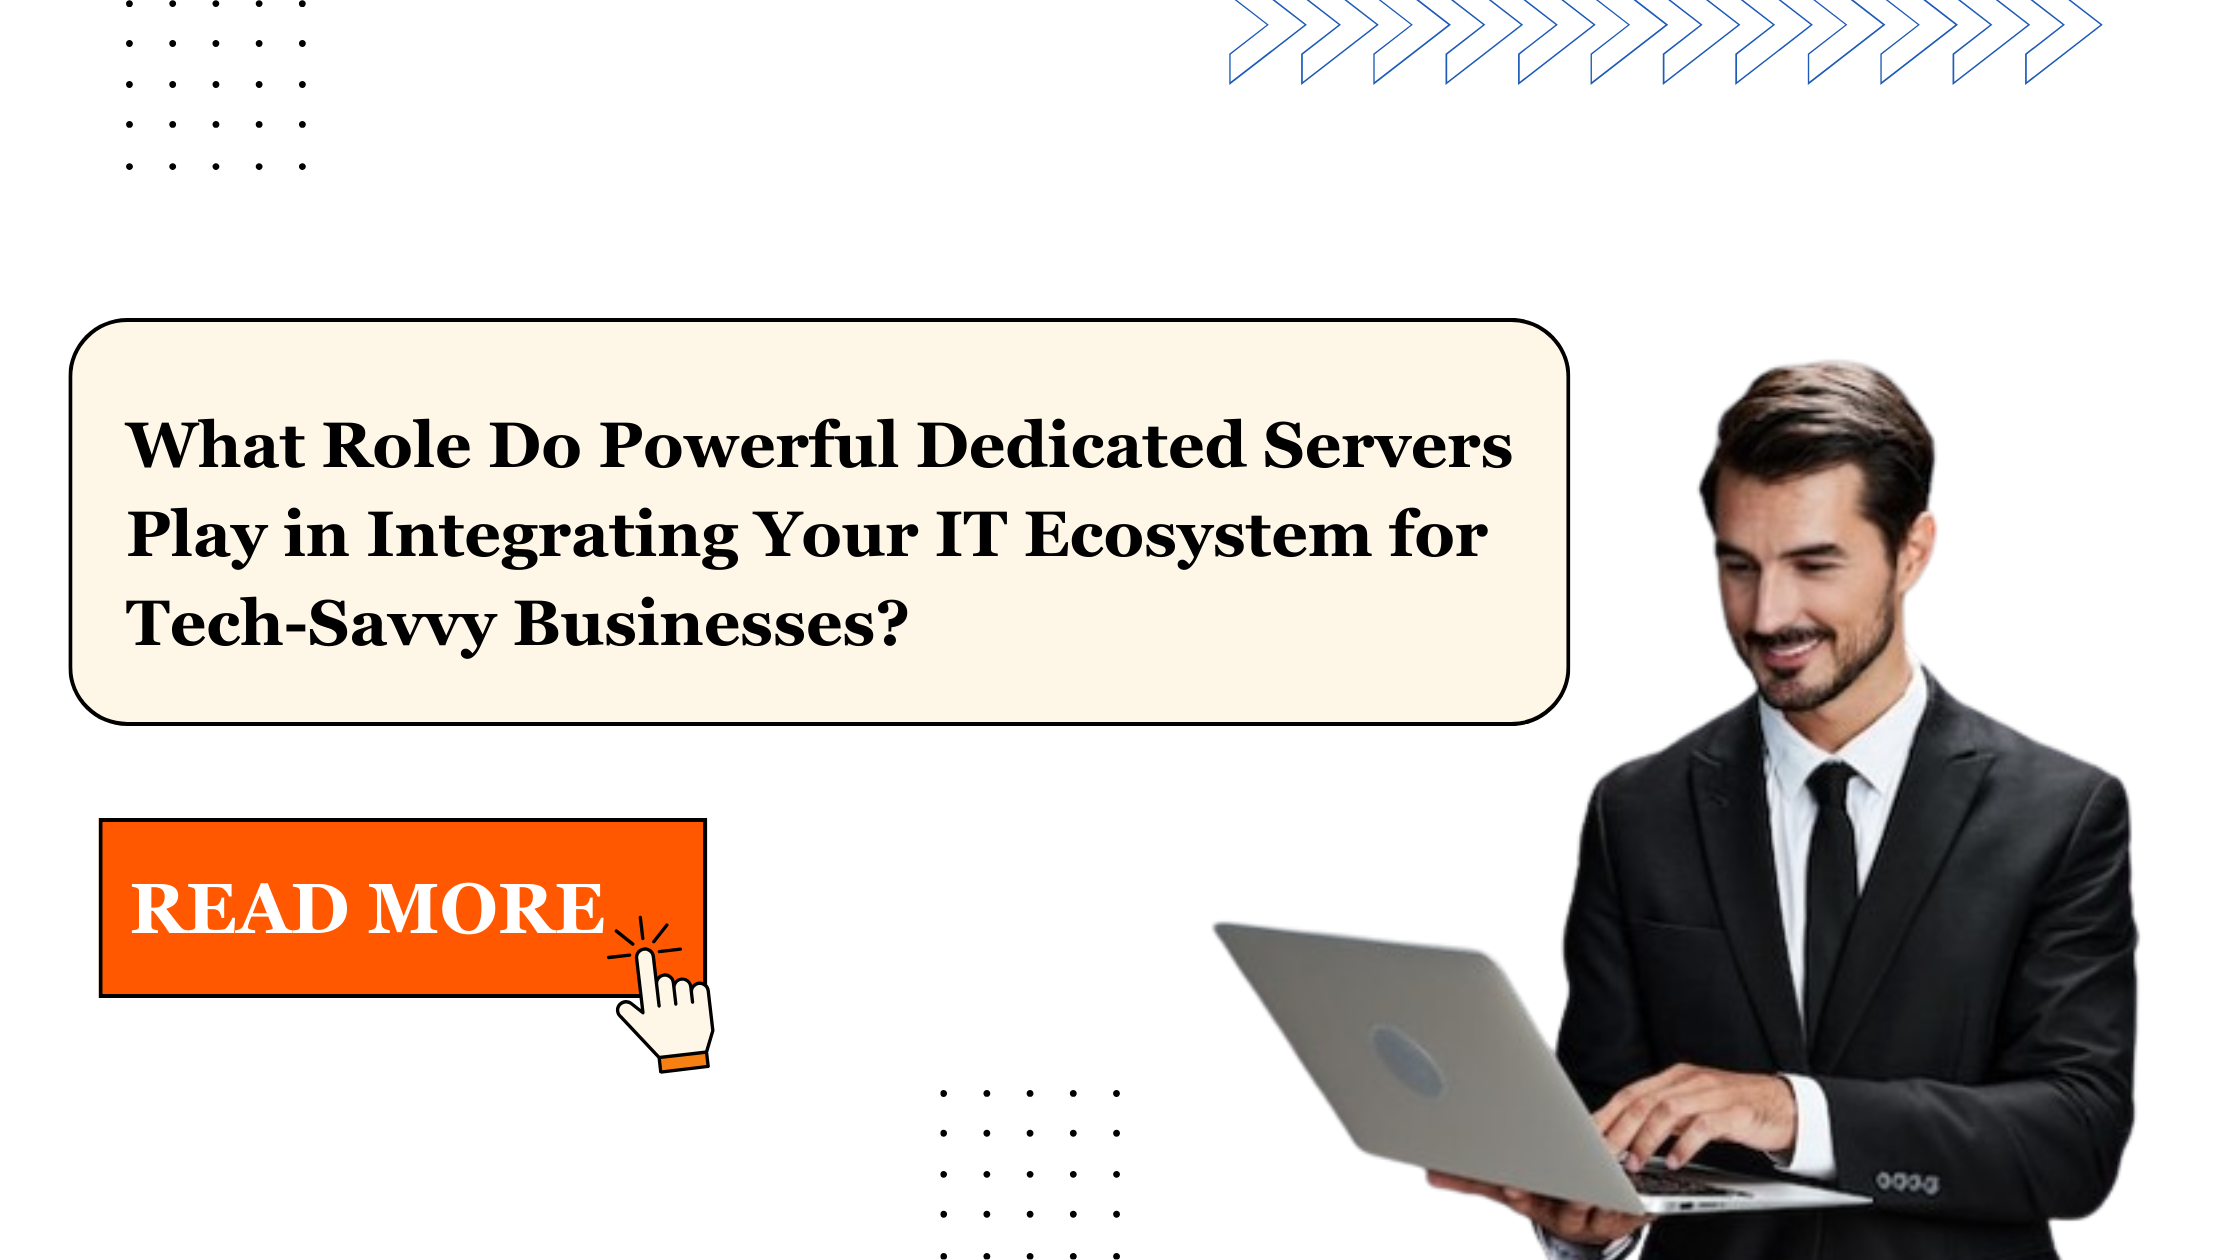 What Role Do Powerful Dedicated Servers Play in Integrating Your IT Ecosystem for Tech-Savvy Businesses